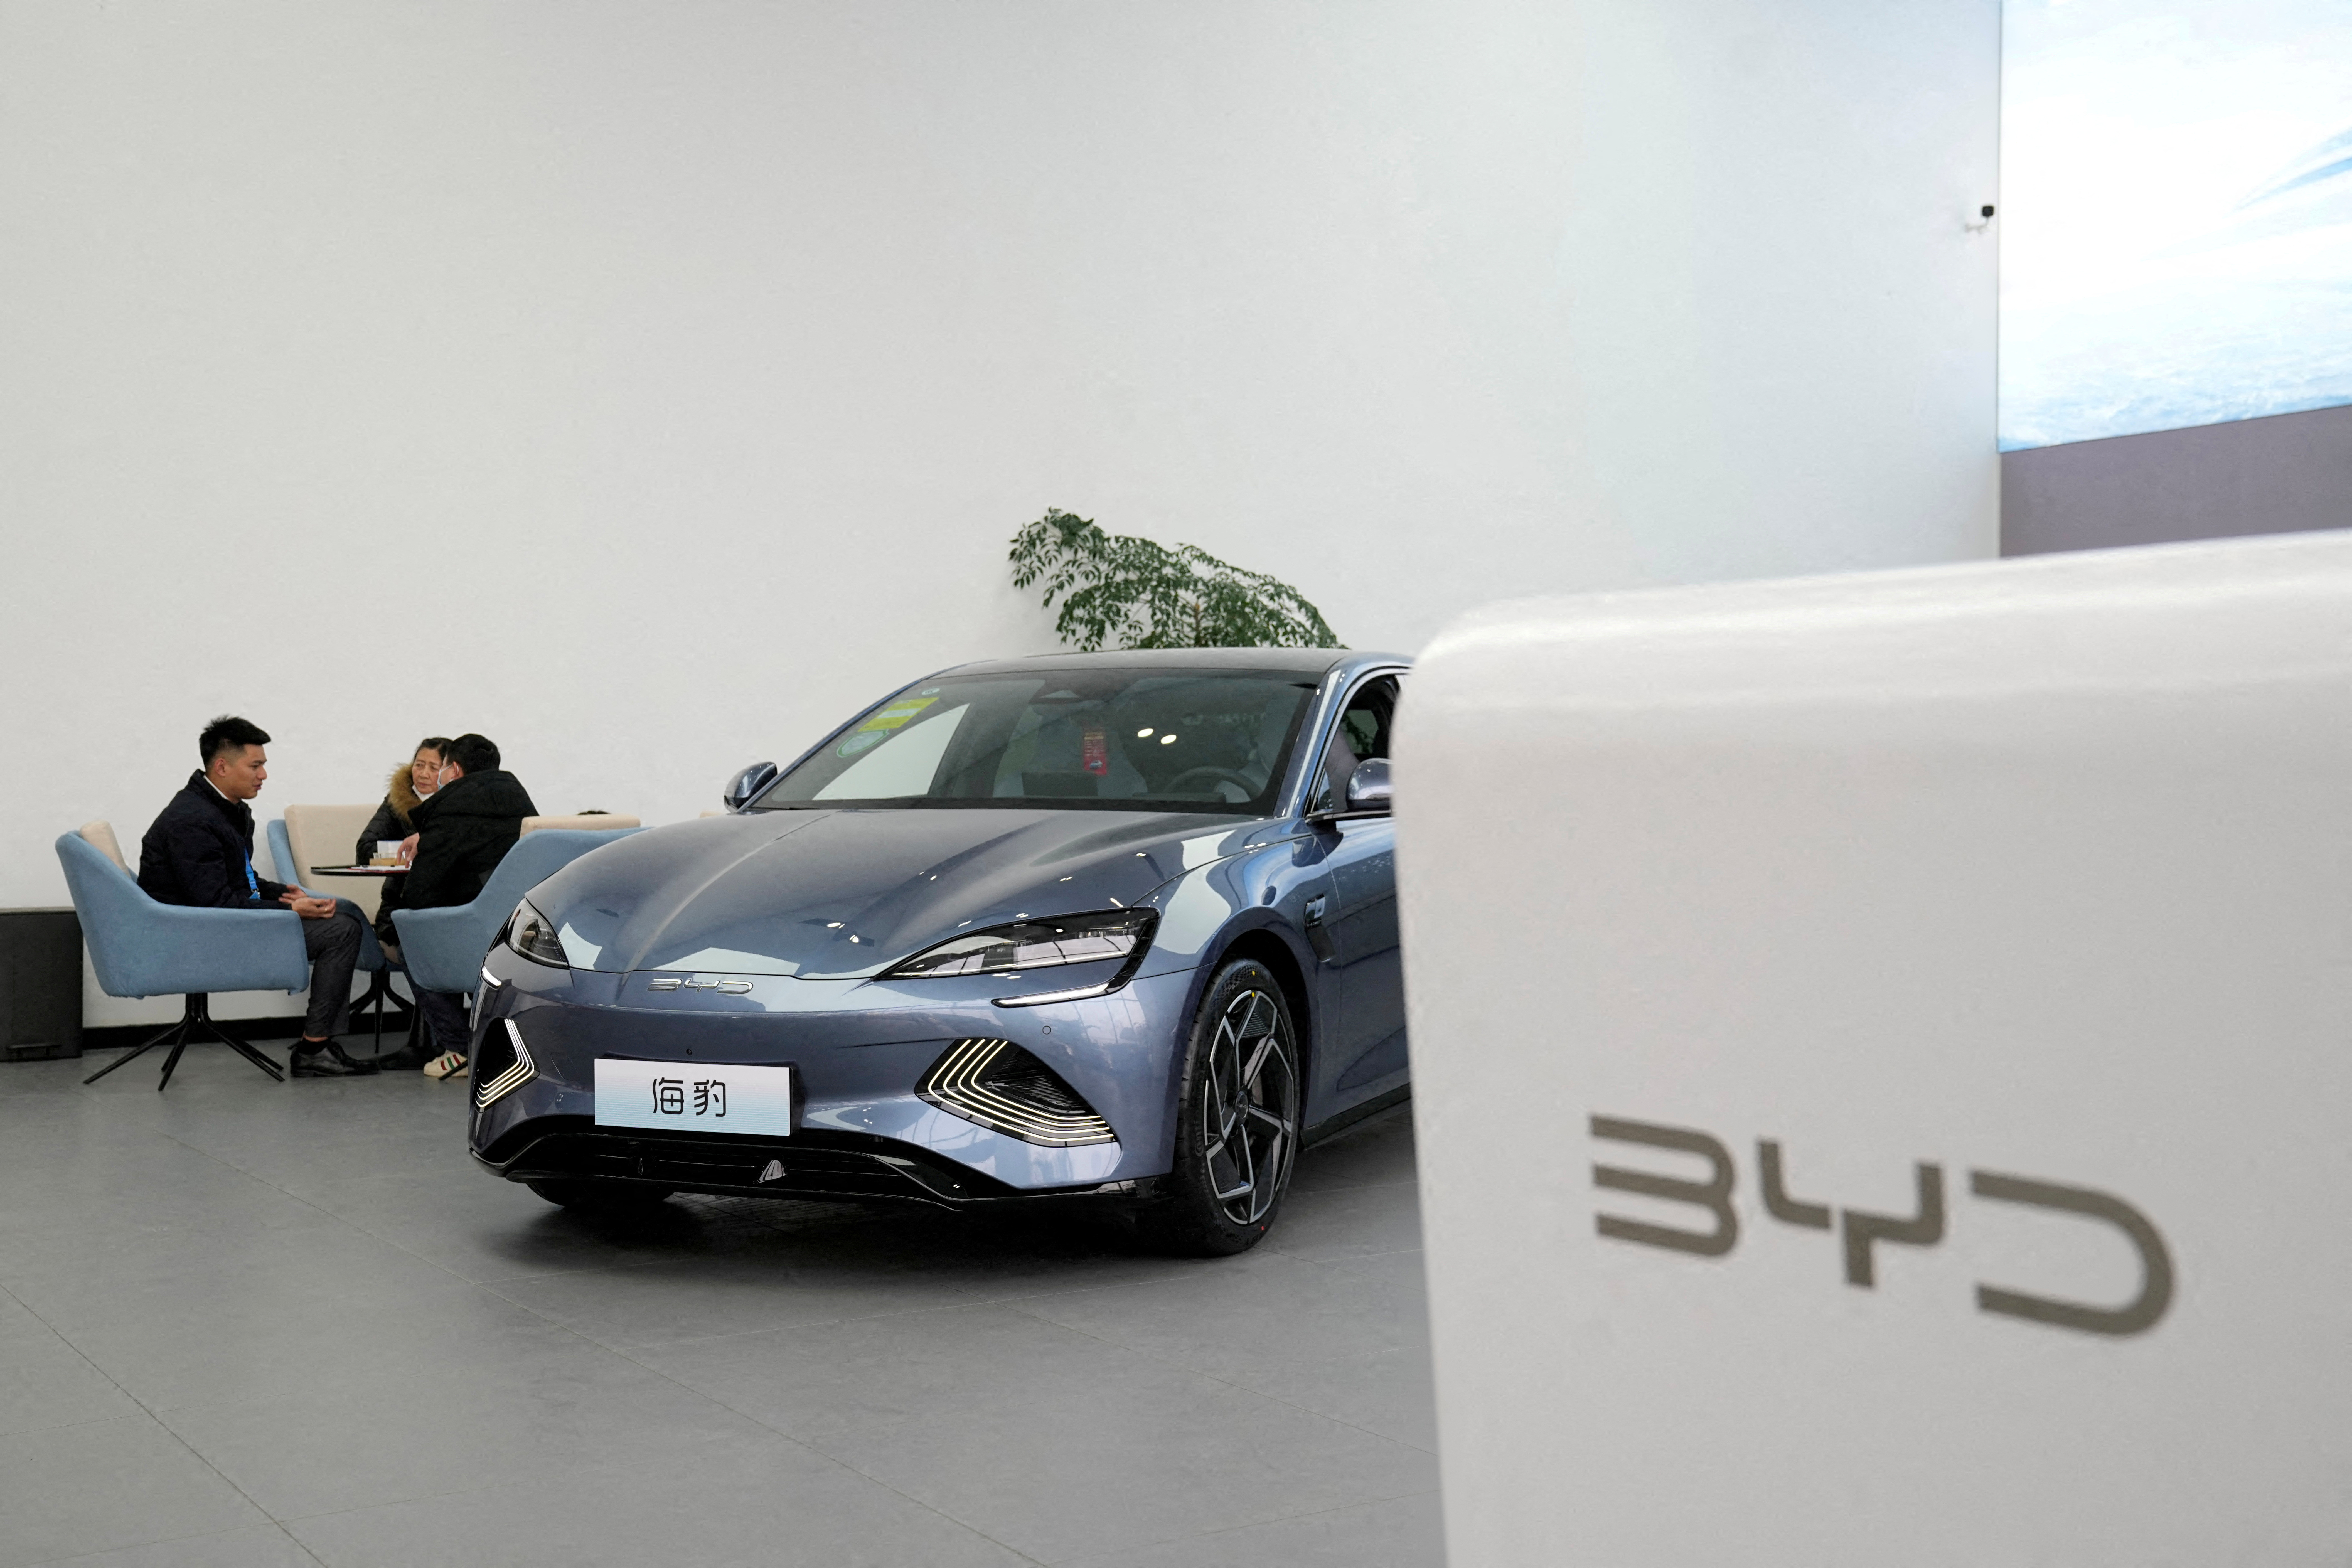 China's electric car drive, led by BYD, leaves global brands behind